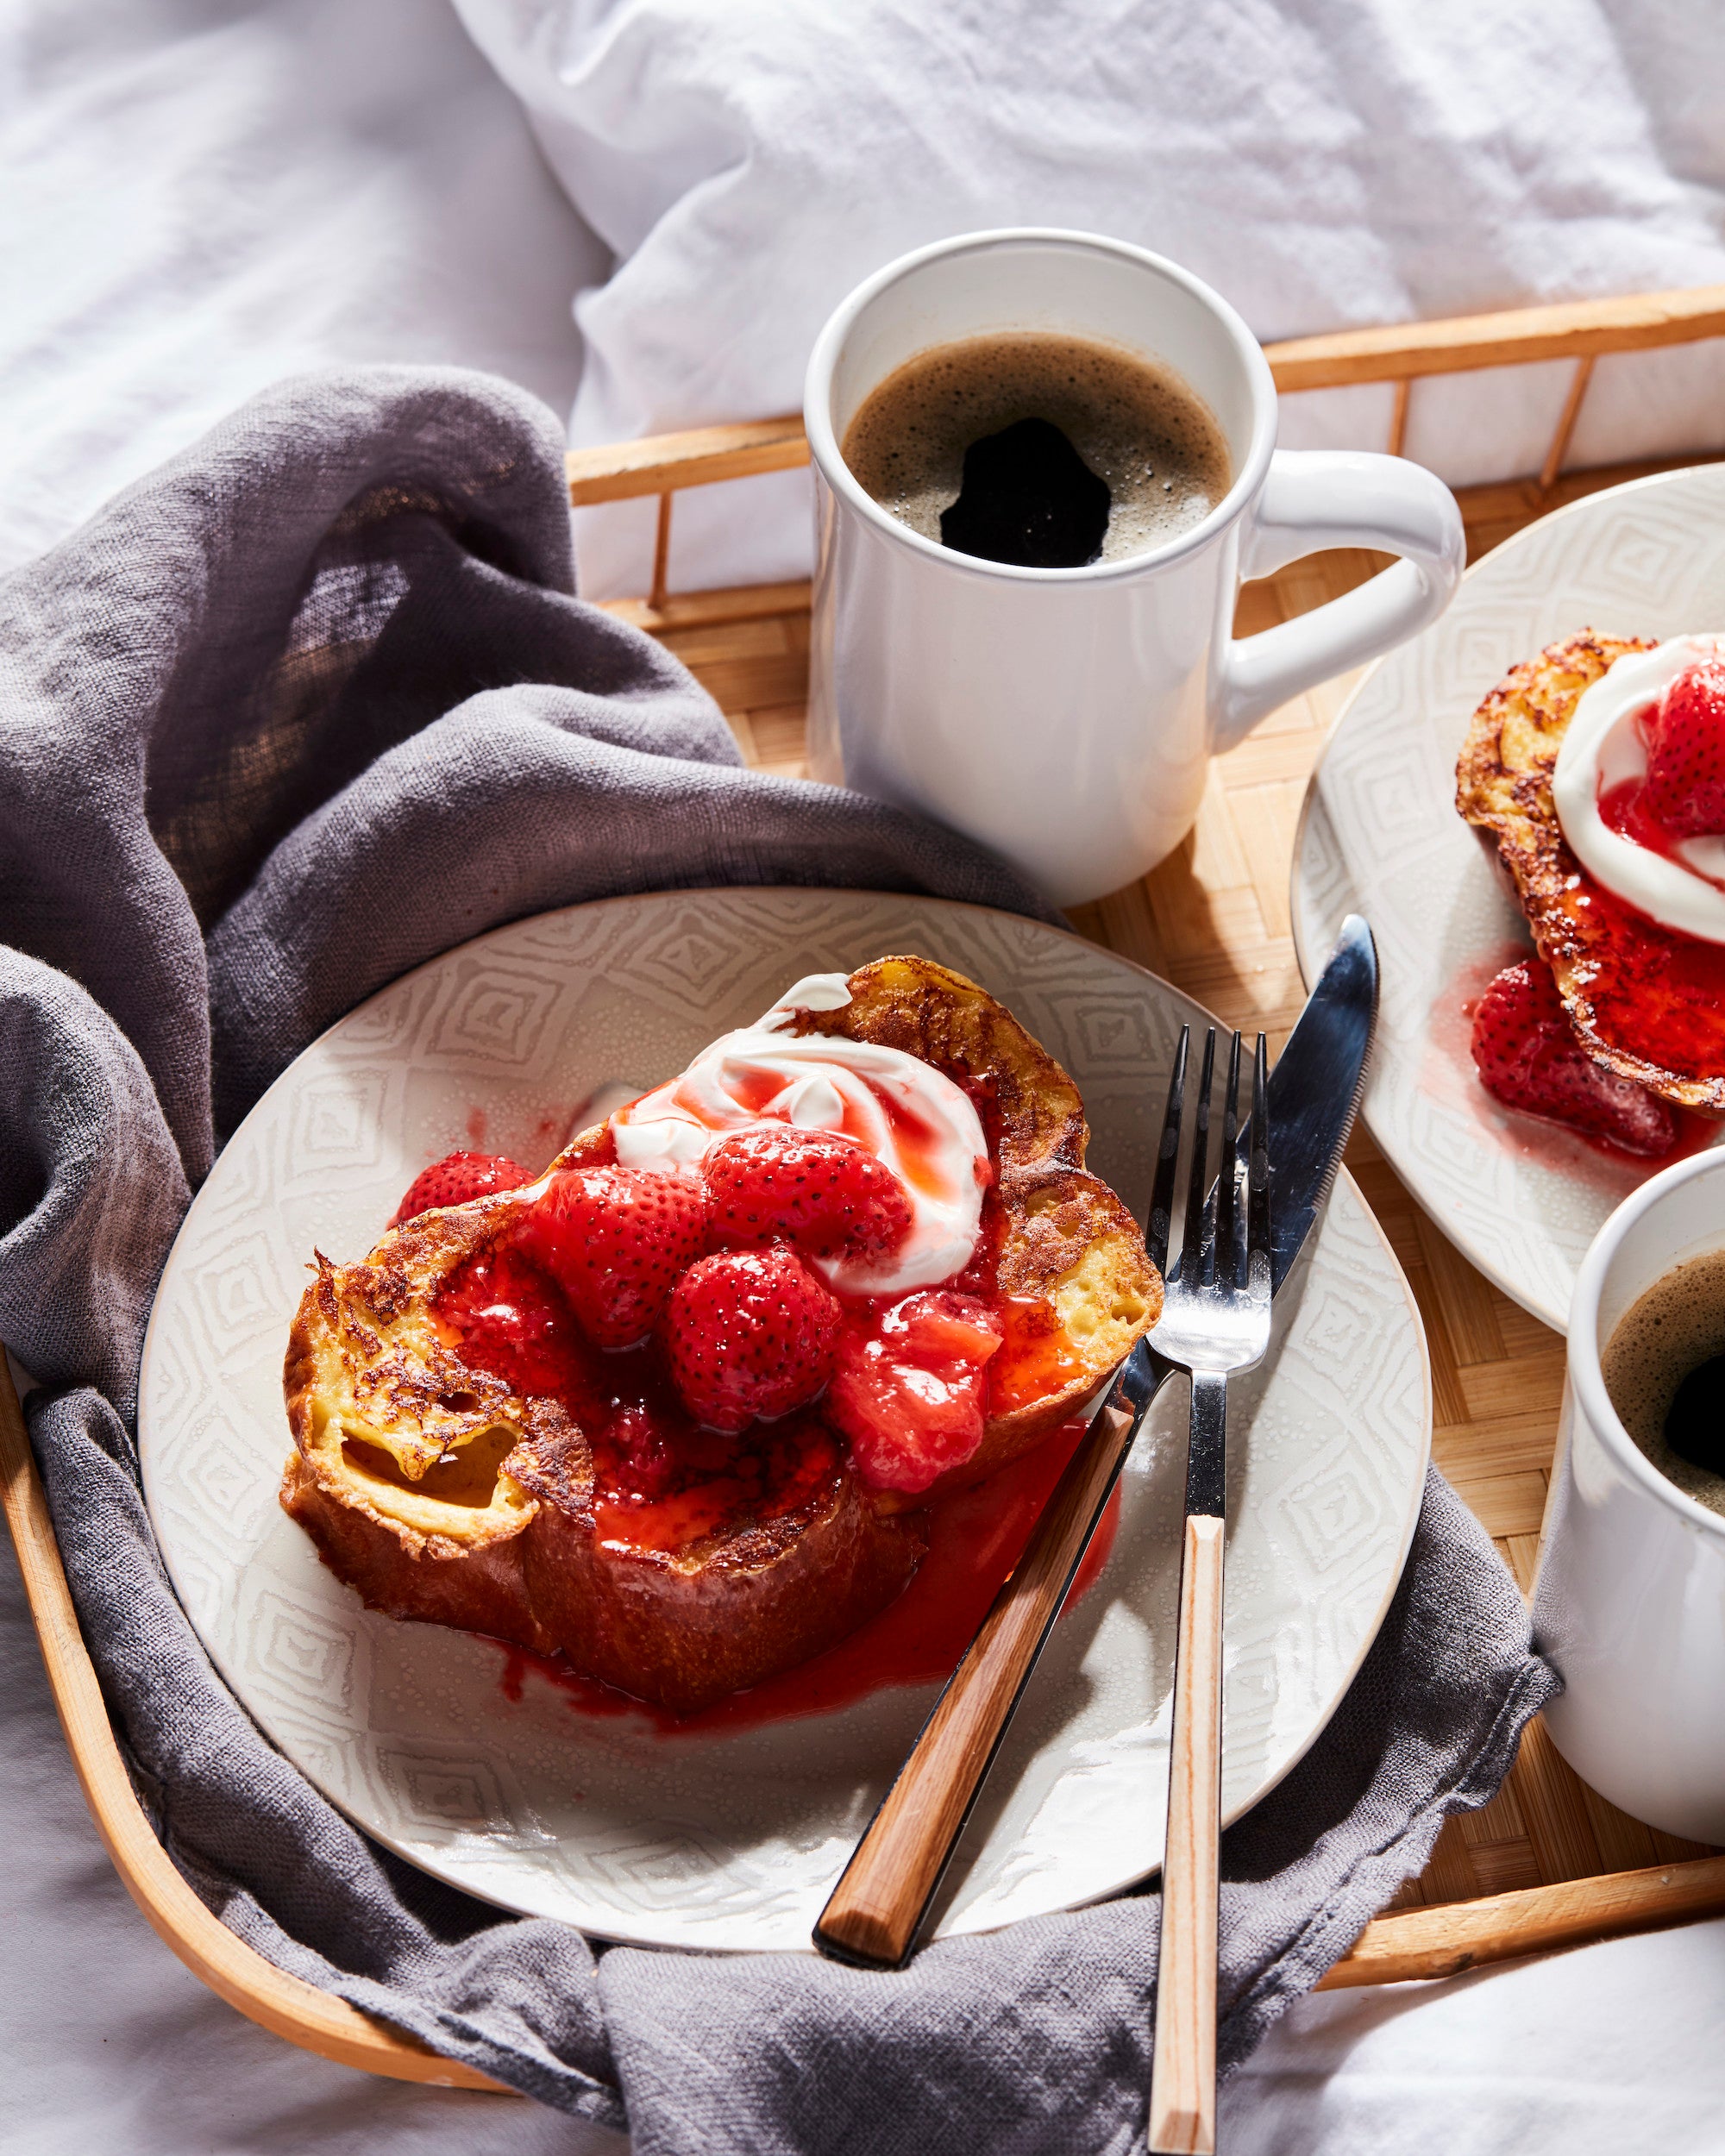 Challah French Toast with Sour Cream-Strawberry Swirl